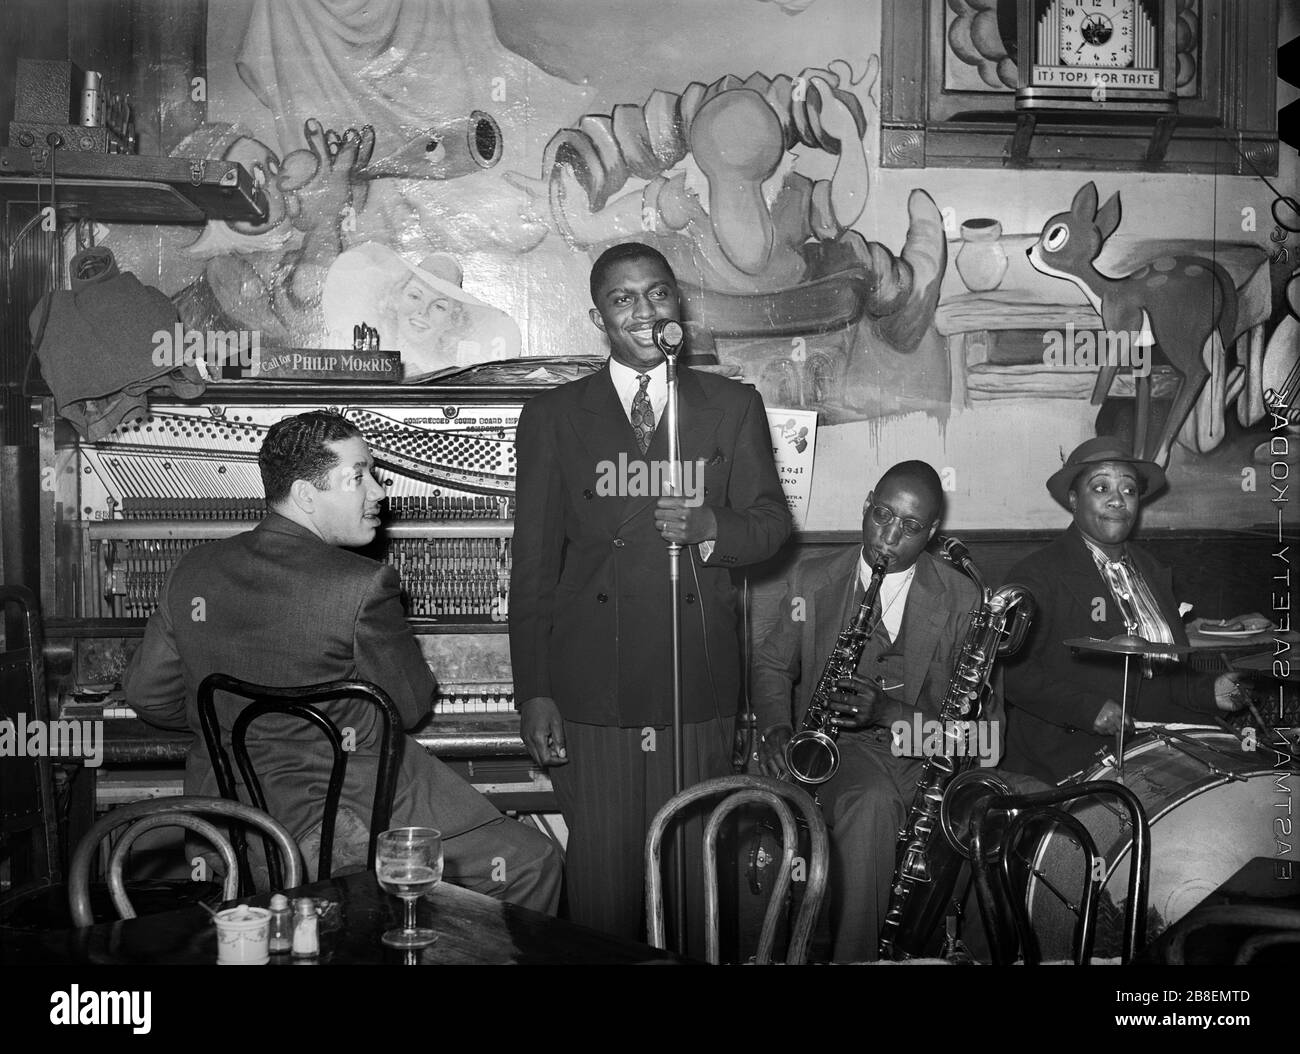 Musicians performing at Tavern, Chicago, Illinois, USA, Russell Lee for U.S. Farm Security Administration, April 1941 Stock Photo